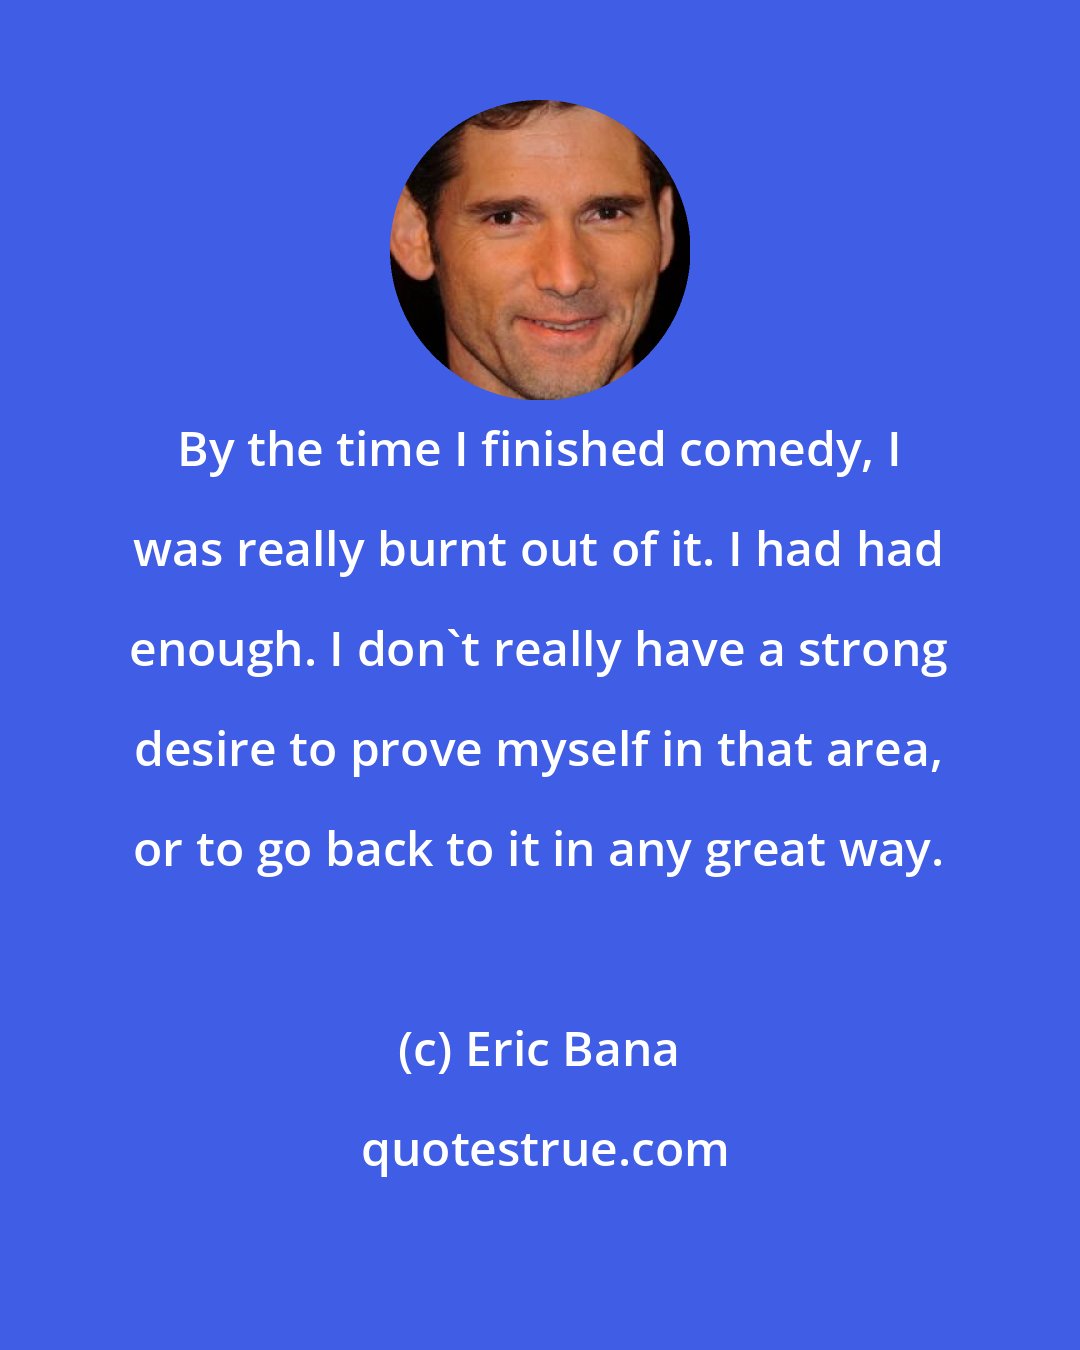 Eric Bana: By the time I finished comedy, I was really burnt out of it. I had had enough. I don't really have a strong desire to prove myself in that area, or to go back to it in any great way.